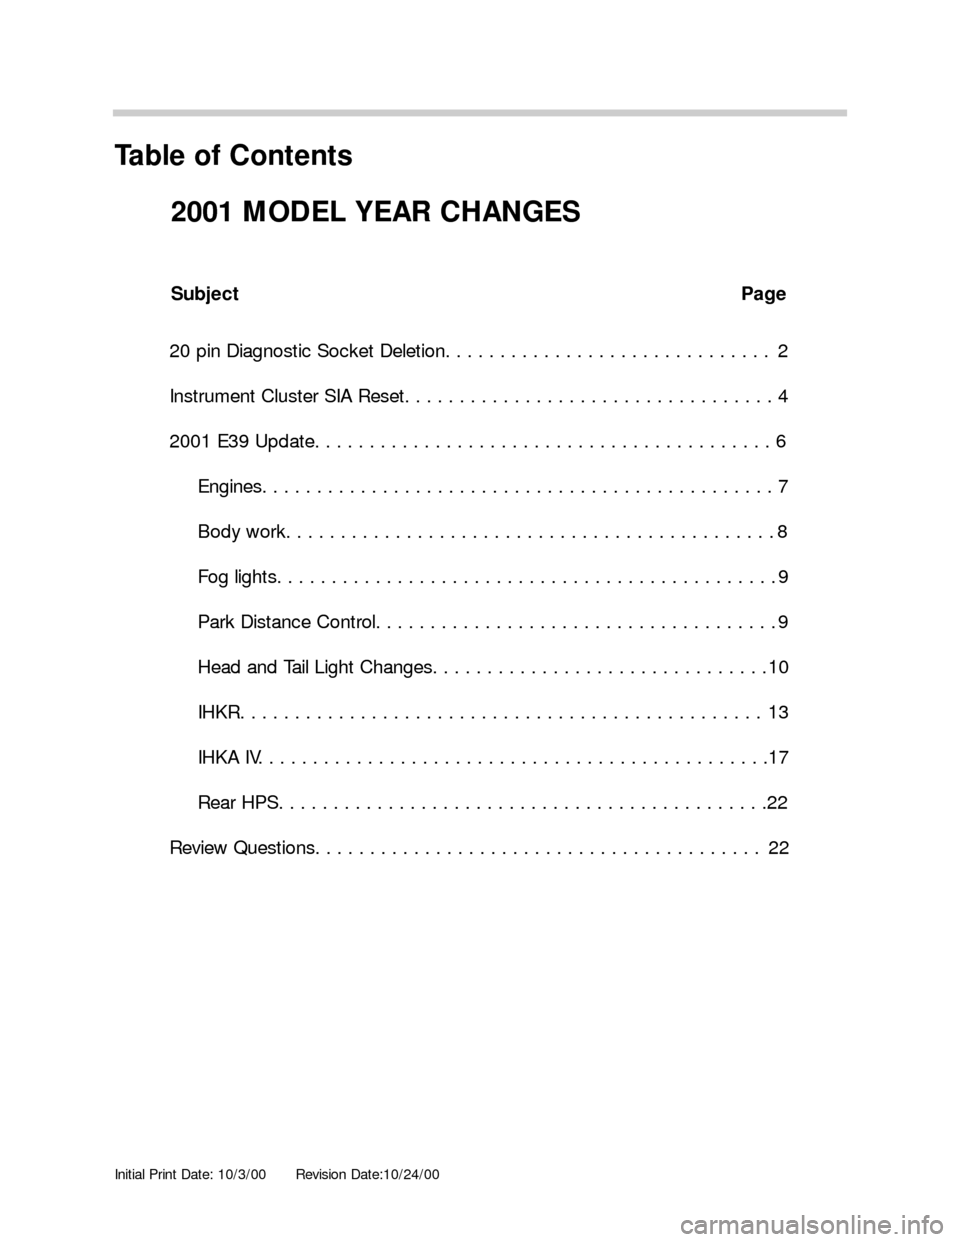 BMW X5 2003 E53 Model Yar Changes Initial Print Date: 10/3/00Revision Date:10/24/00
Subject Page
20 pin Diagnostic Socket Deletion. . . . . . . . . . . . . . . . . . . . . . . . . . . . . . 2
Instrument Cluster SIA Reset. . . . . . . 